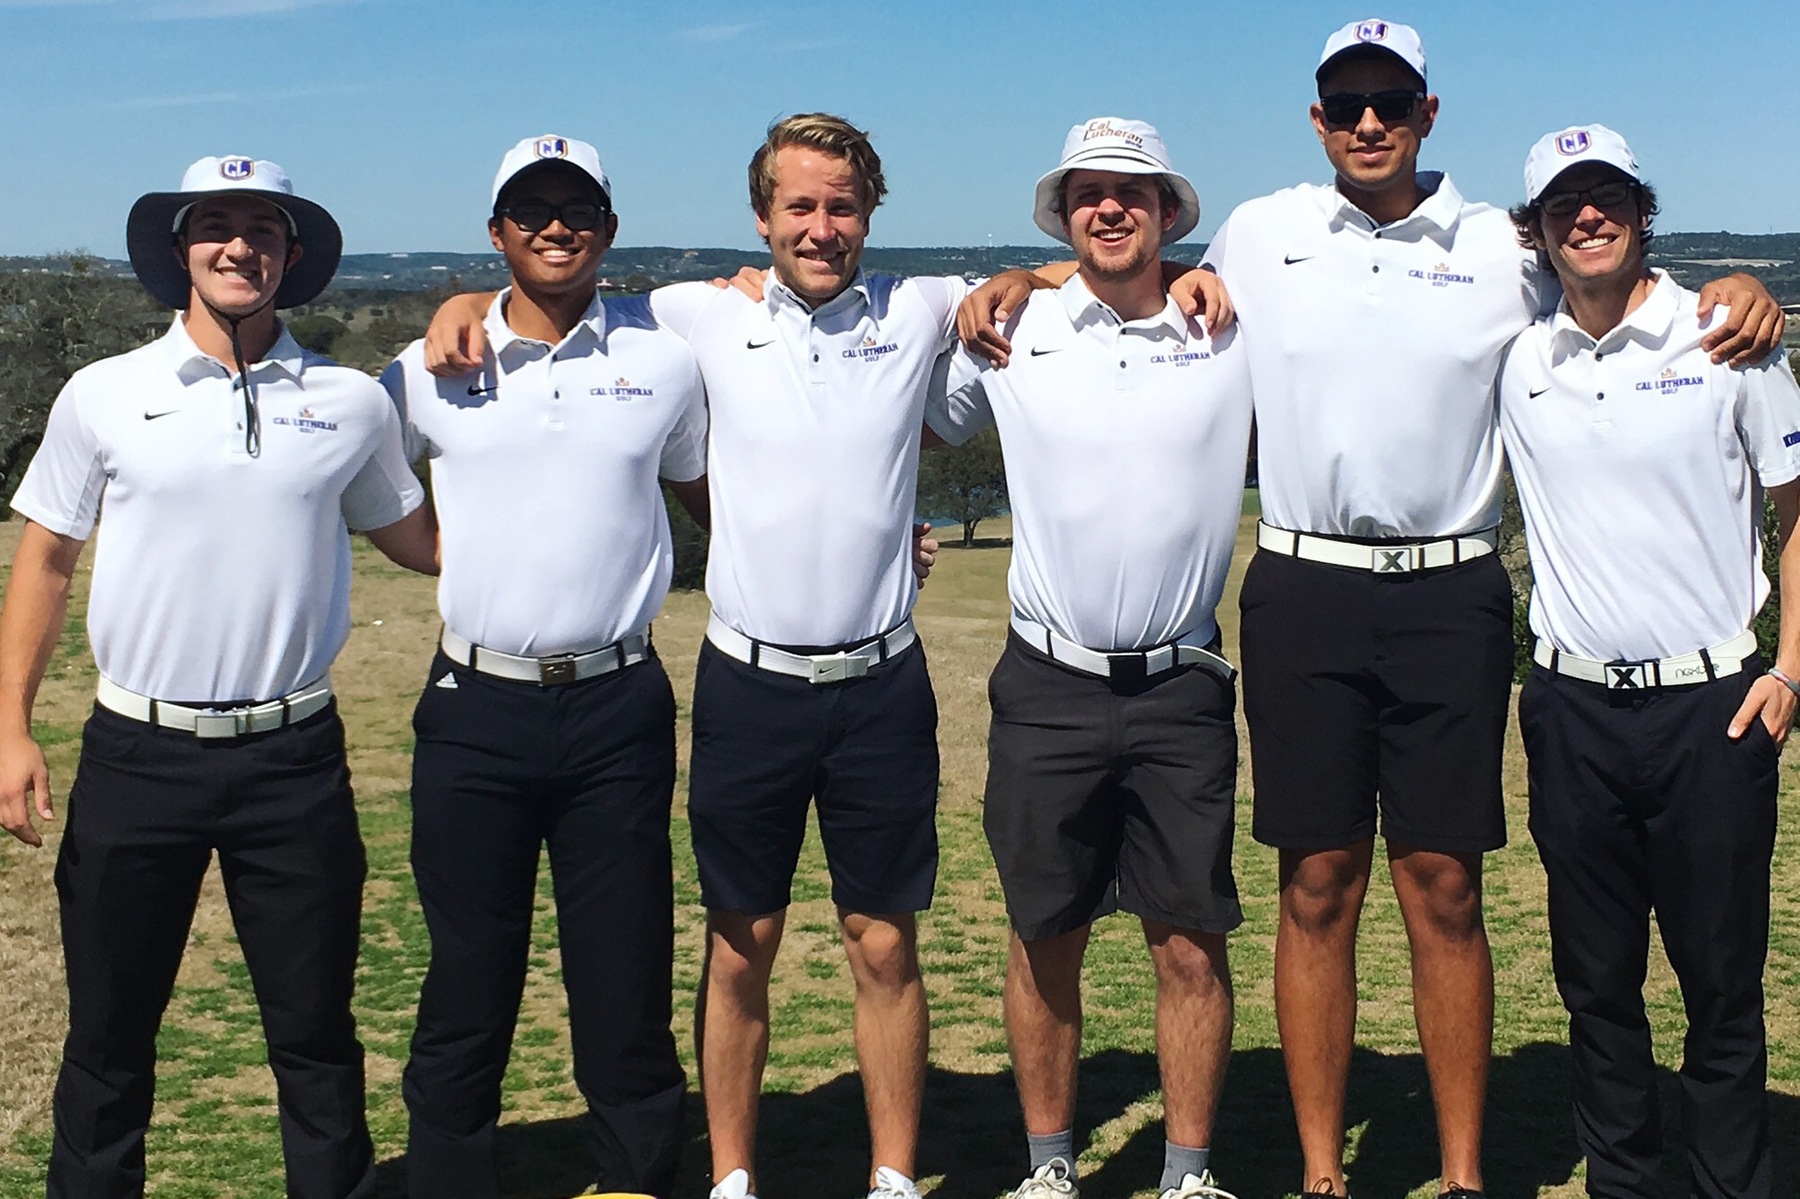 Kyaw Ties for Second, Kingsmen Fourth in Texas